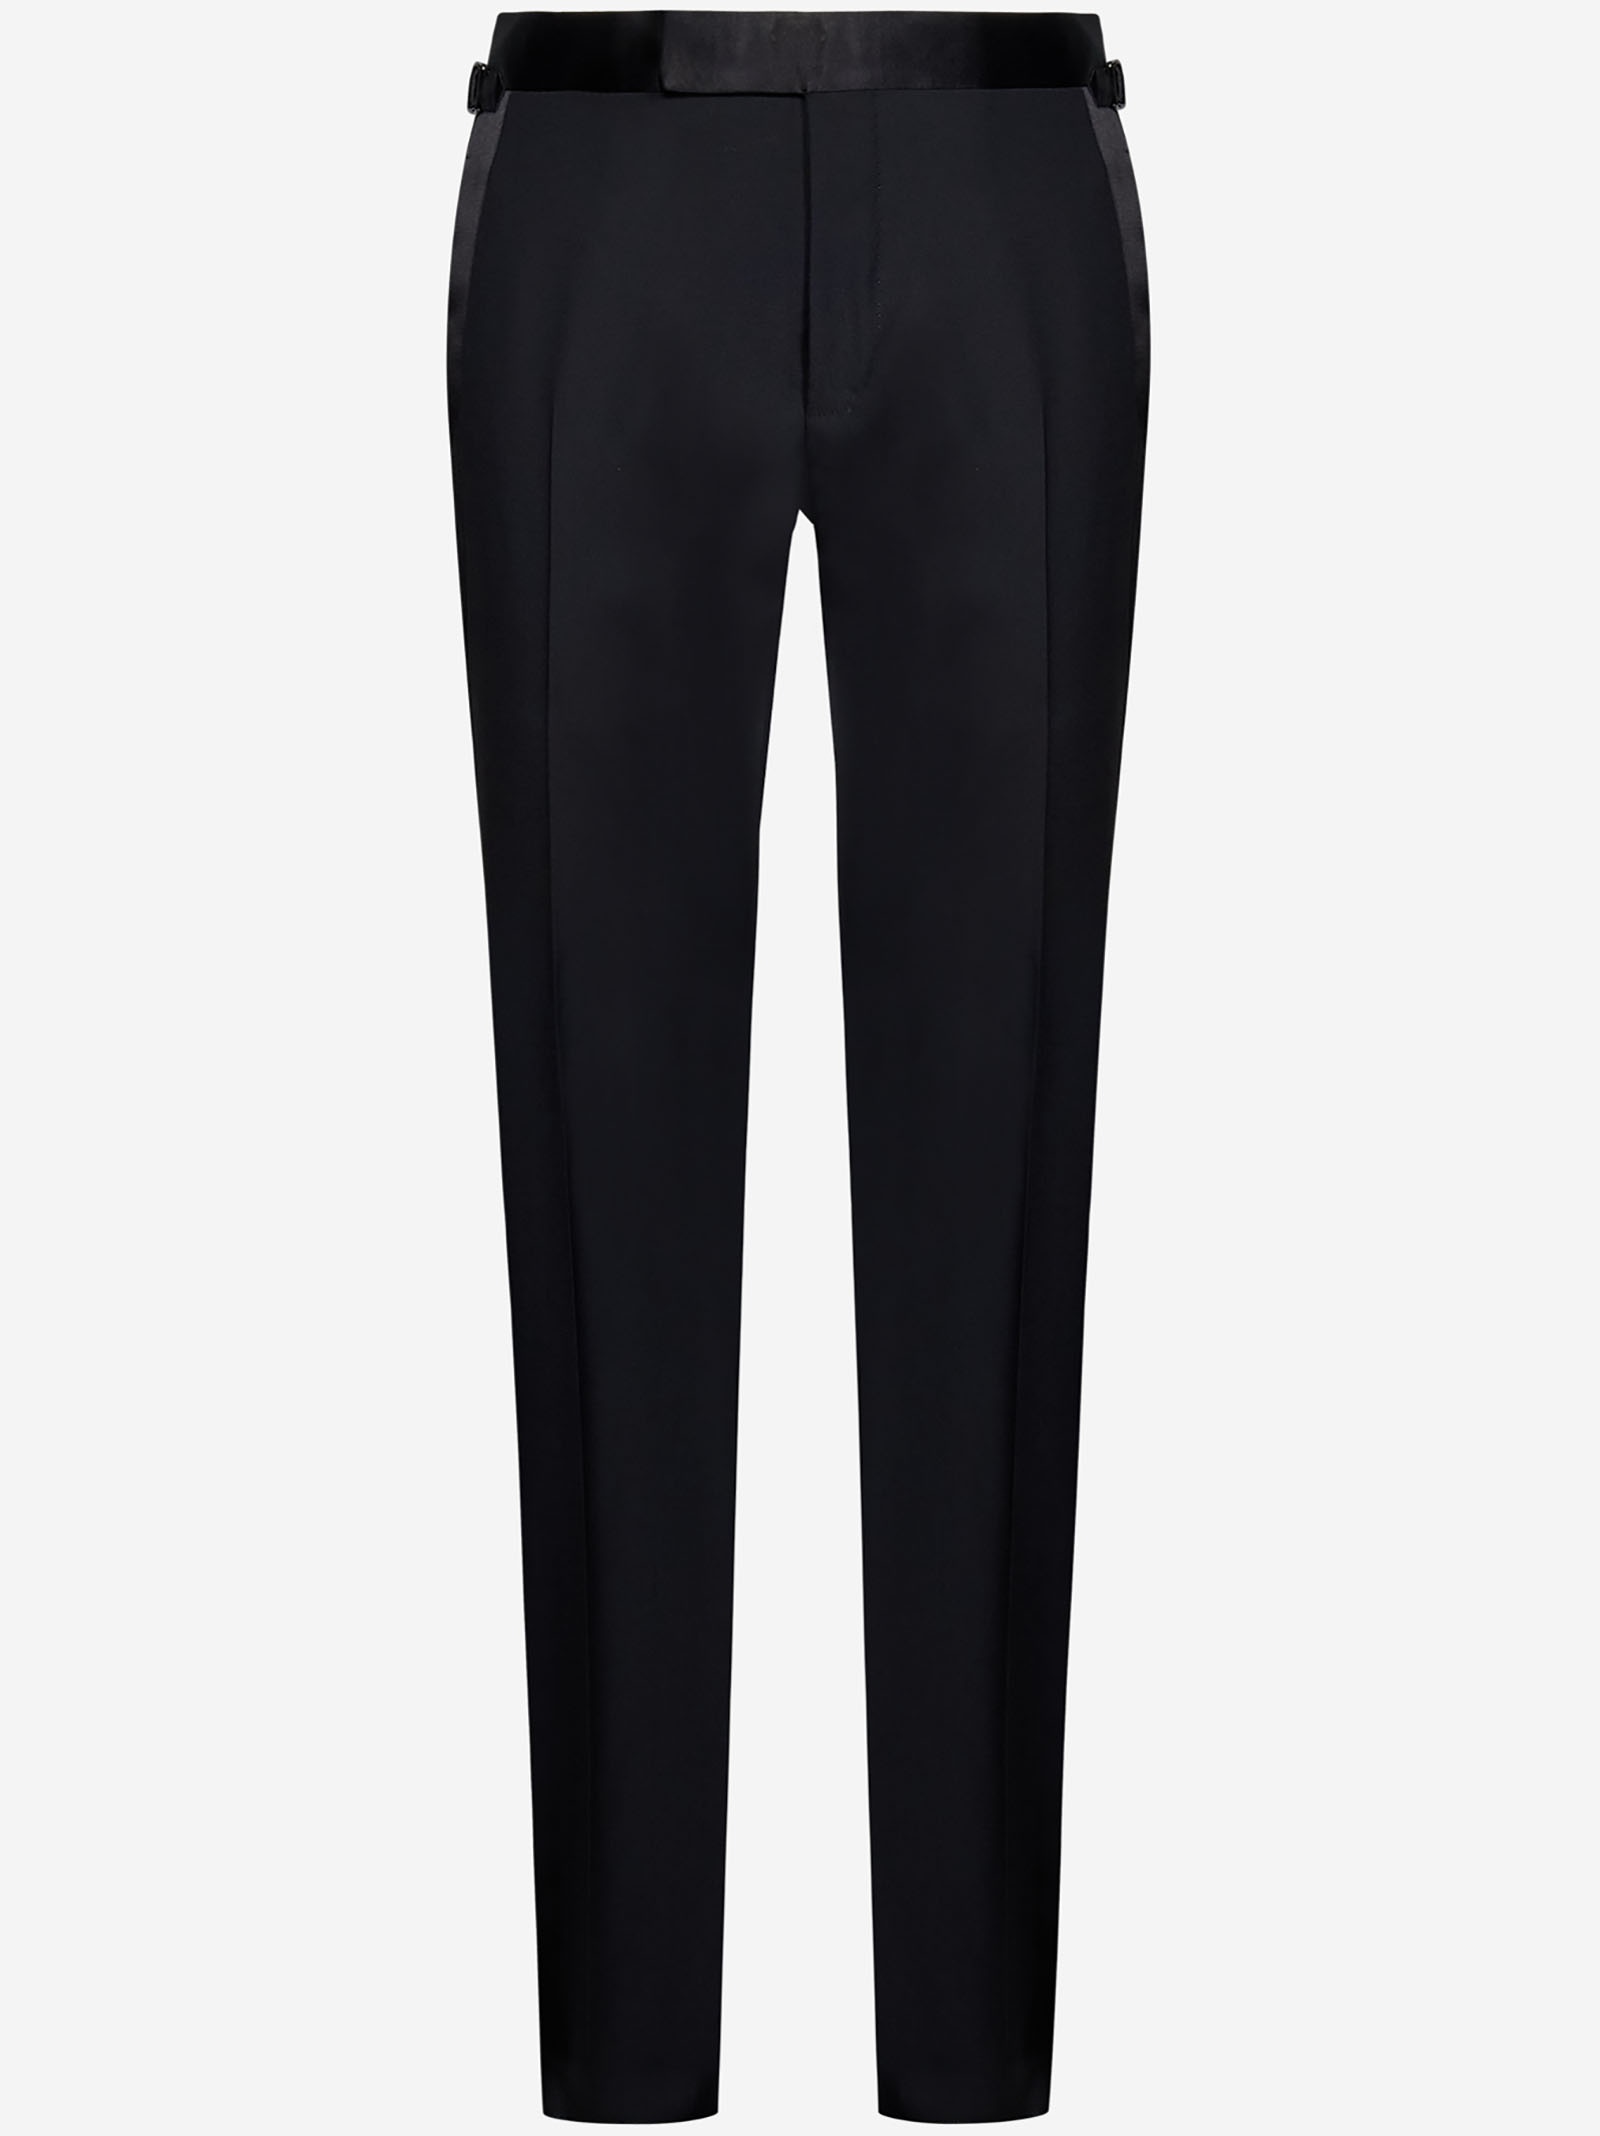 Black wool and silk satin 'Shelton' suit with single-breasted blazer and tailored trousers. - 4